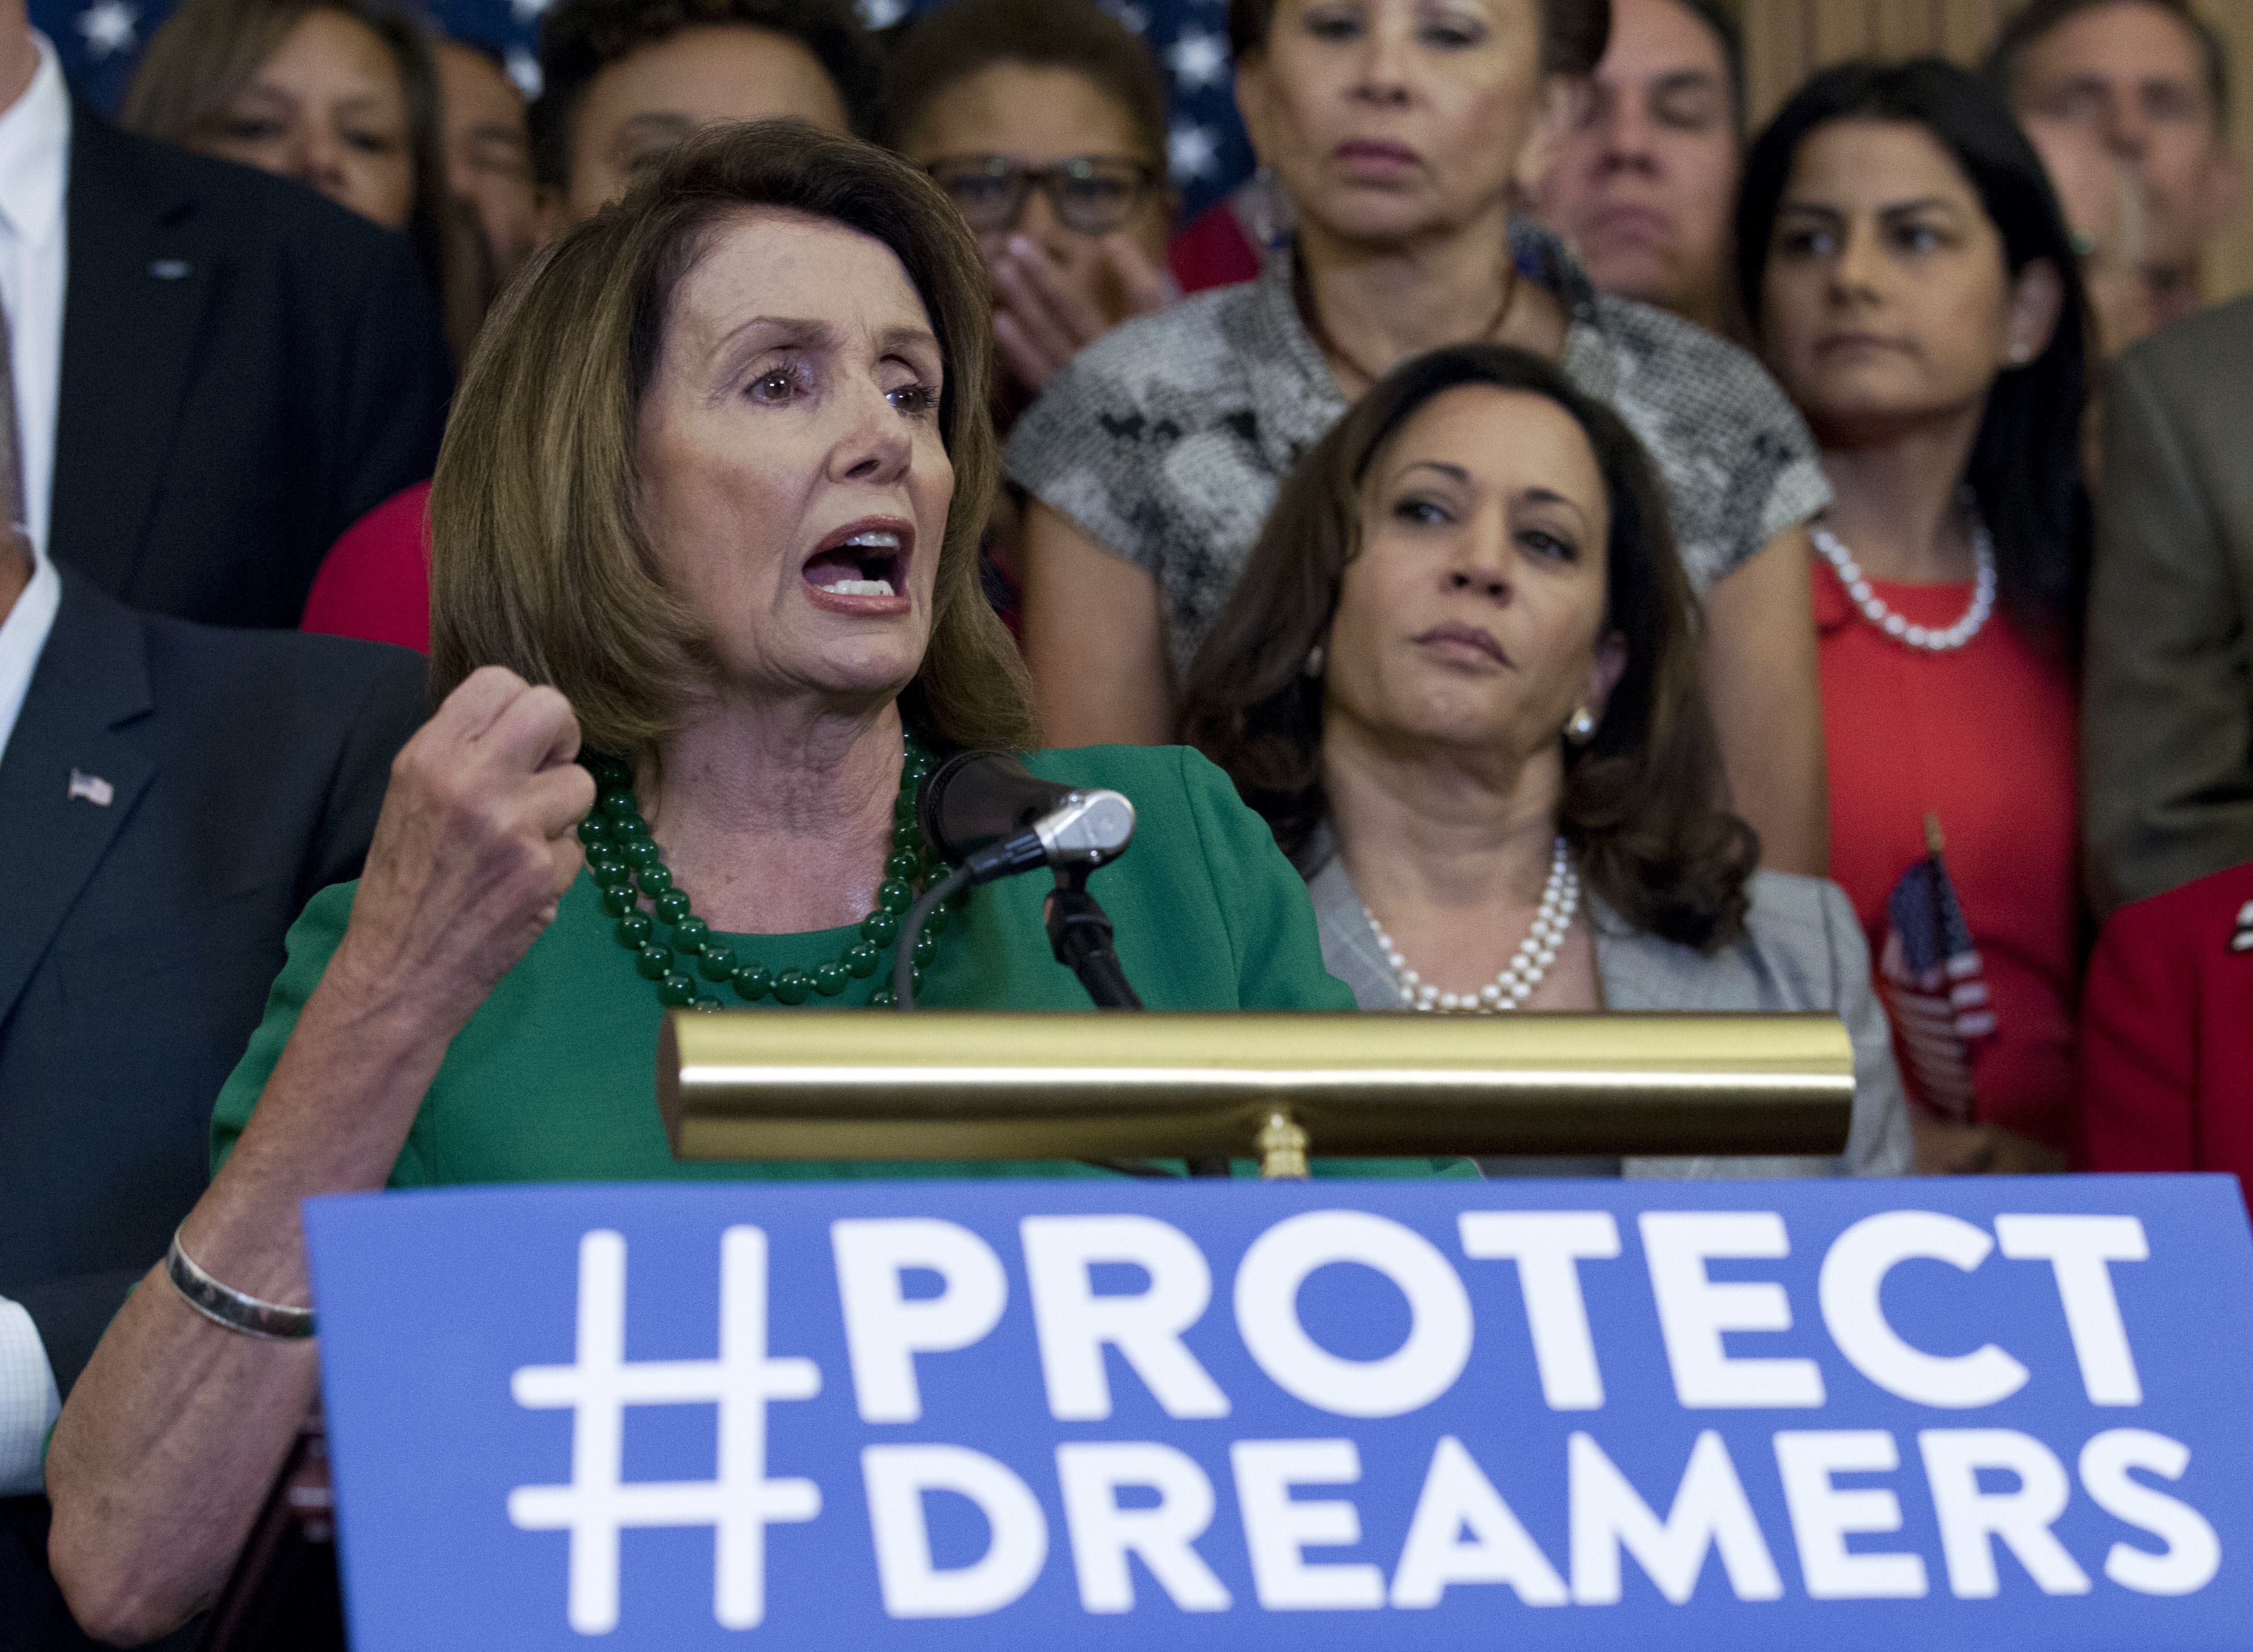 House Minority Leader Nancy Pelosi at a news conference on Capitol Hill in Washington, on Sept. 6, 2017 calling for Congressional Republicans to stand up to President Trump's decision to terminate DACA. (Jose Luis Magana—AP)